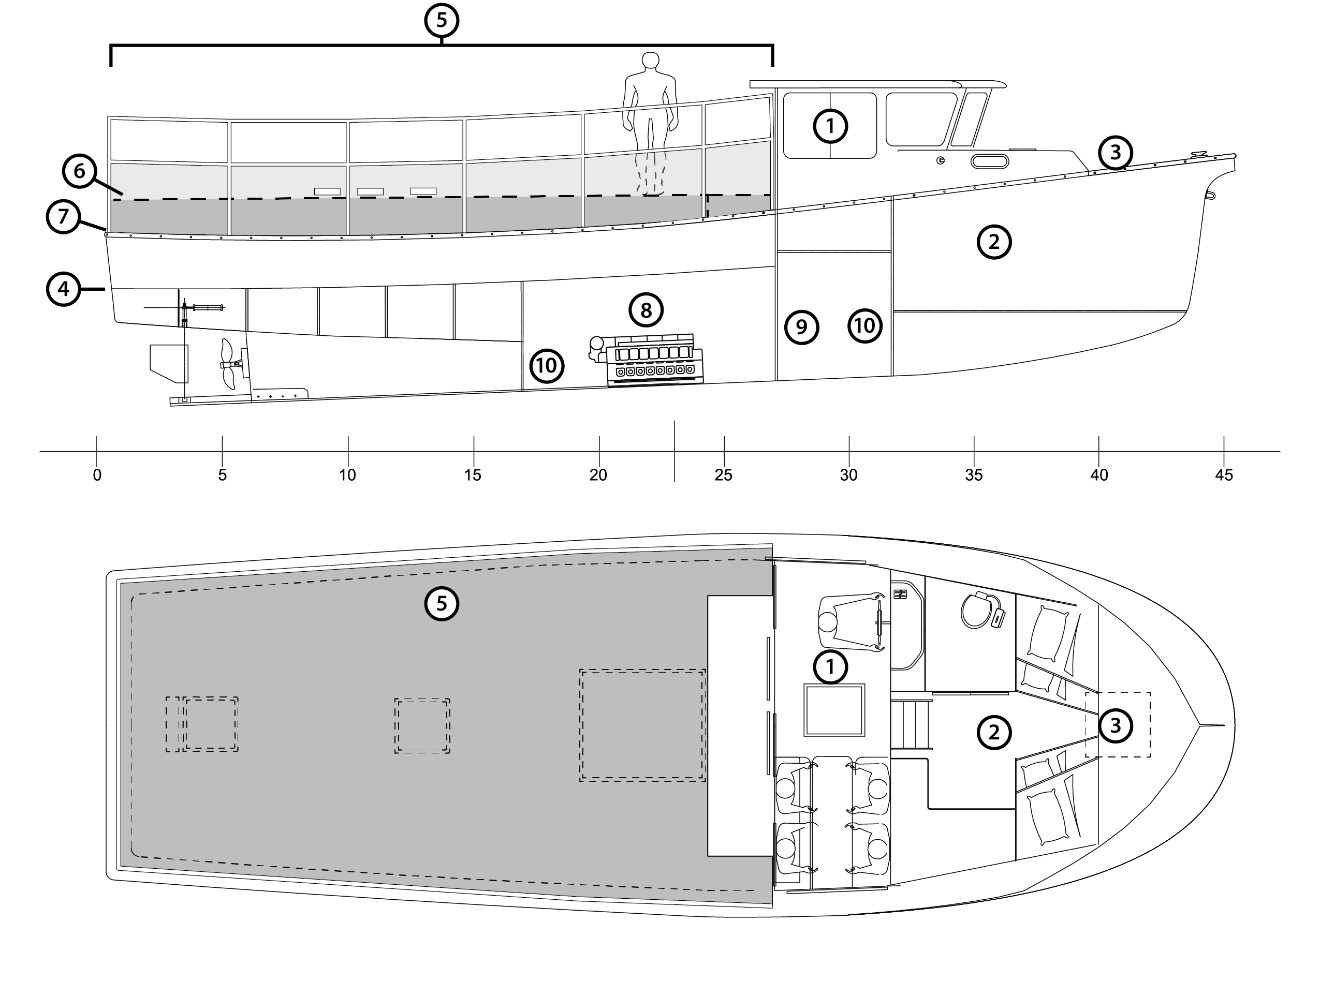 Profile and plan diagrams of the Tyhawk, showing the wheelhouse (1), the accommodation space (2), the emergency escape hatch (3), the main deck (4), the removable deck structure (5), the walking surface of the removable deck (6), the upper edge of the original bulwarks (7), the engine compartment (8), the high-level bilge sensor (9), and bilge pump locations (10) (Source: TSB, based on drawings from Guimond Boats Ltd.)